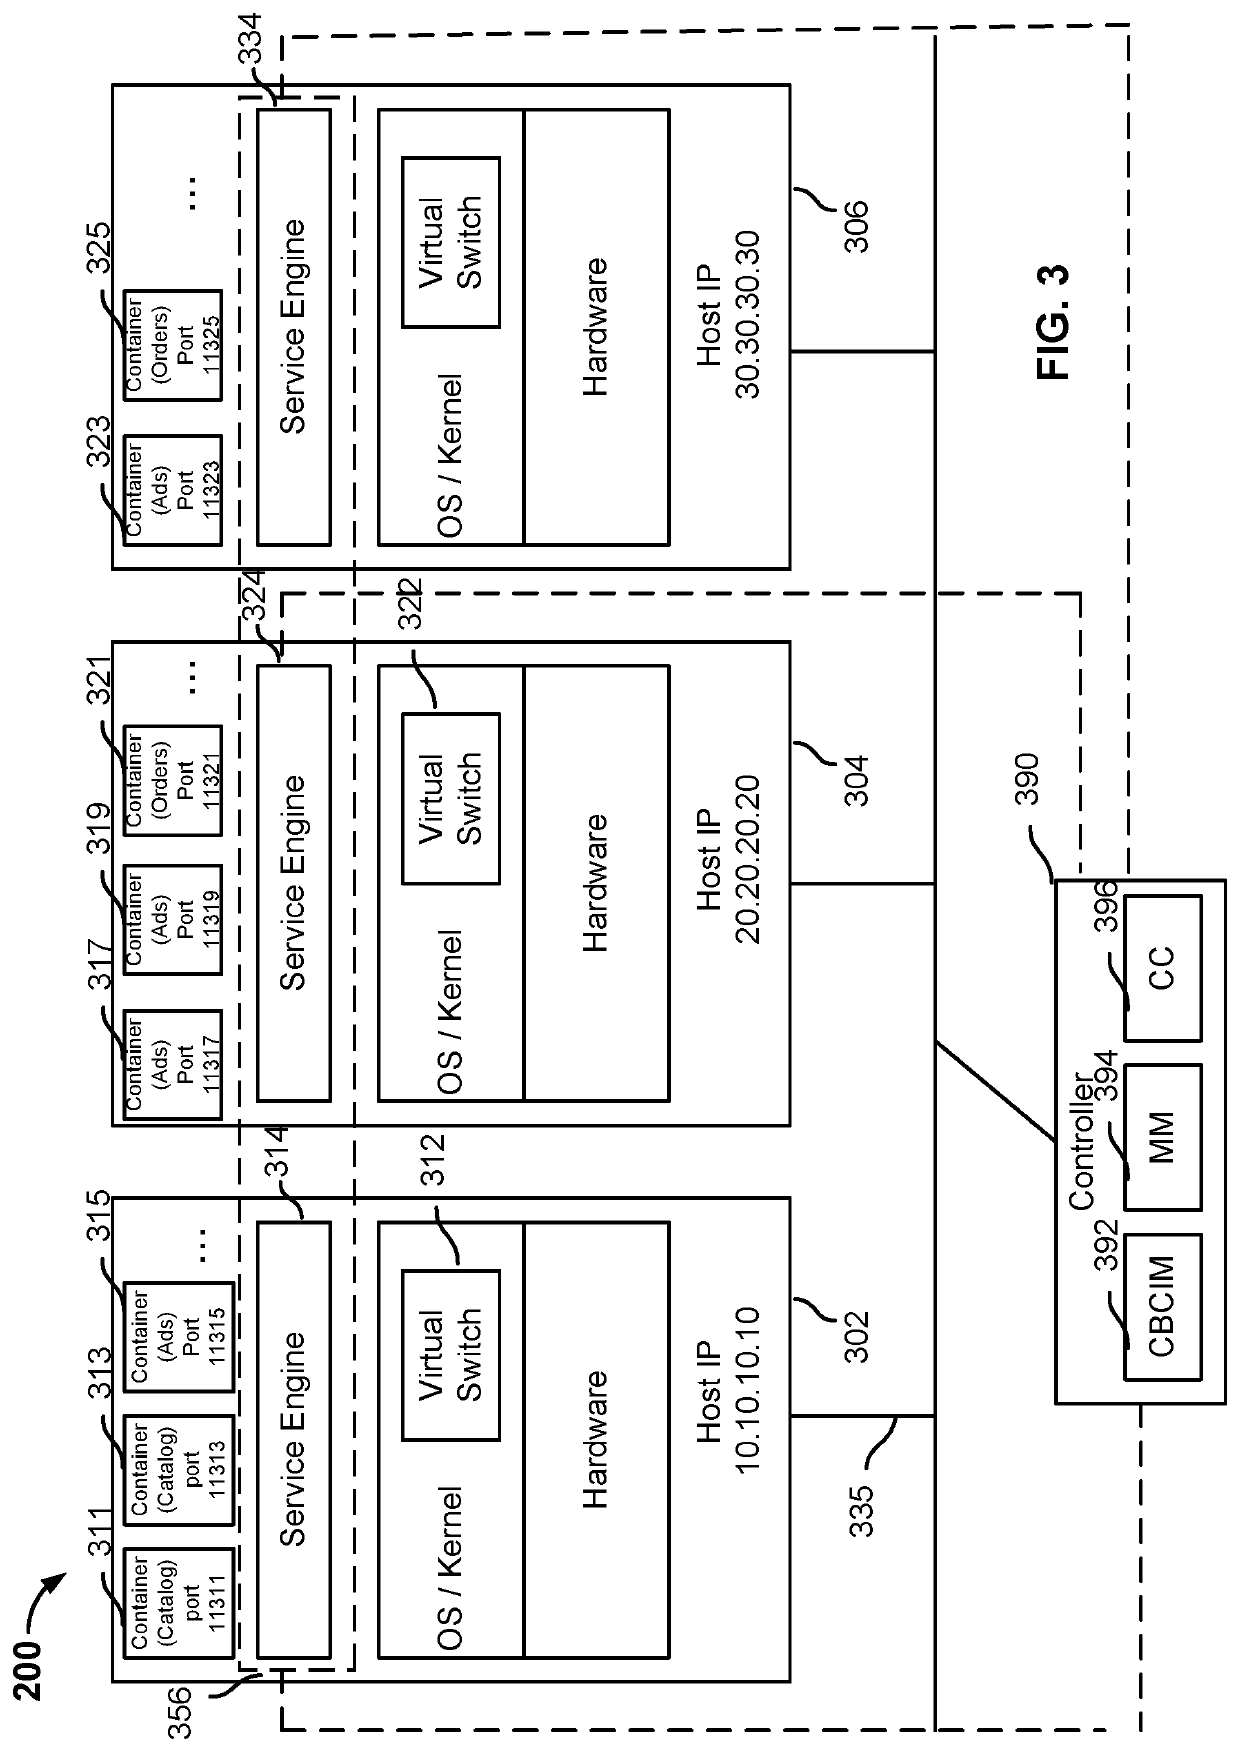 Traffic pattern detection and presentation in container-based cloud computing architecture